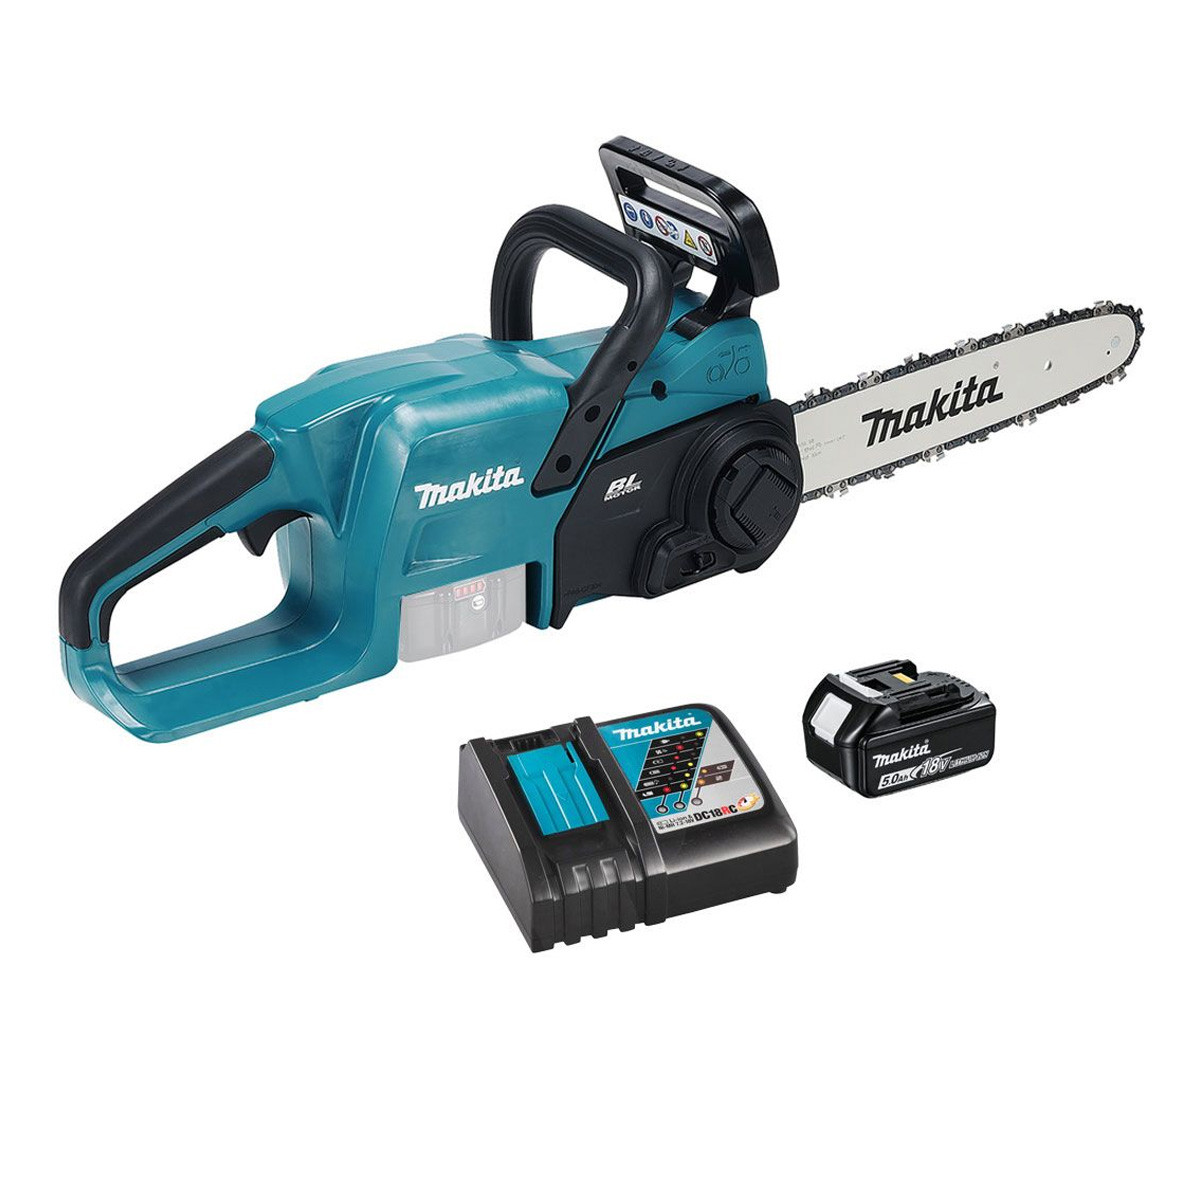 Image of Makita DUC307RTX2 18V LXT 30cm/12" Brushless Chainsaw with 1x 5.0Ah Battery